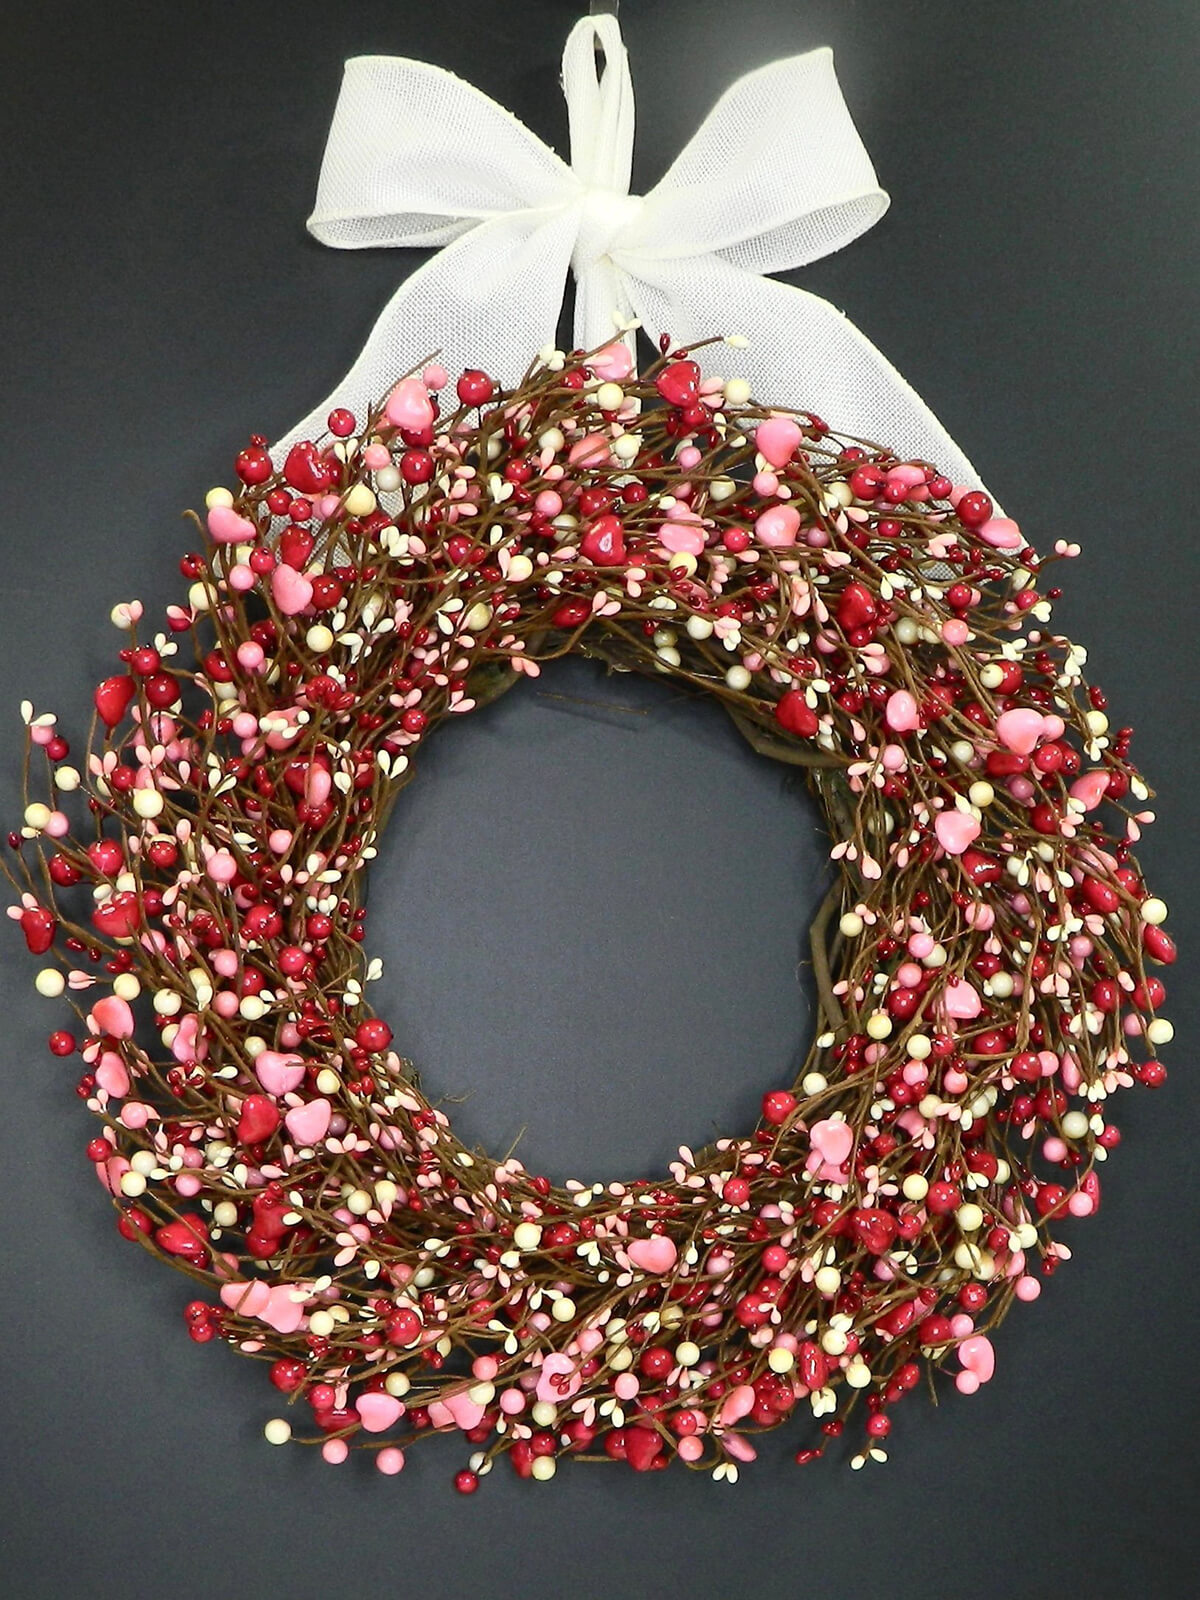 Candy Heart Droplets and Pearls Wreath